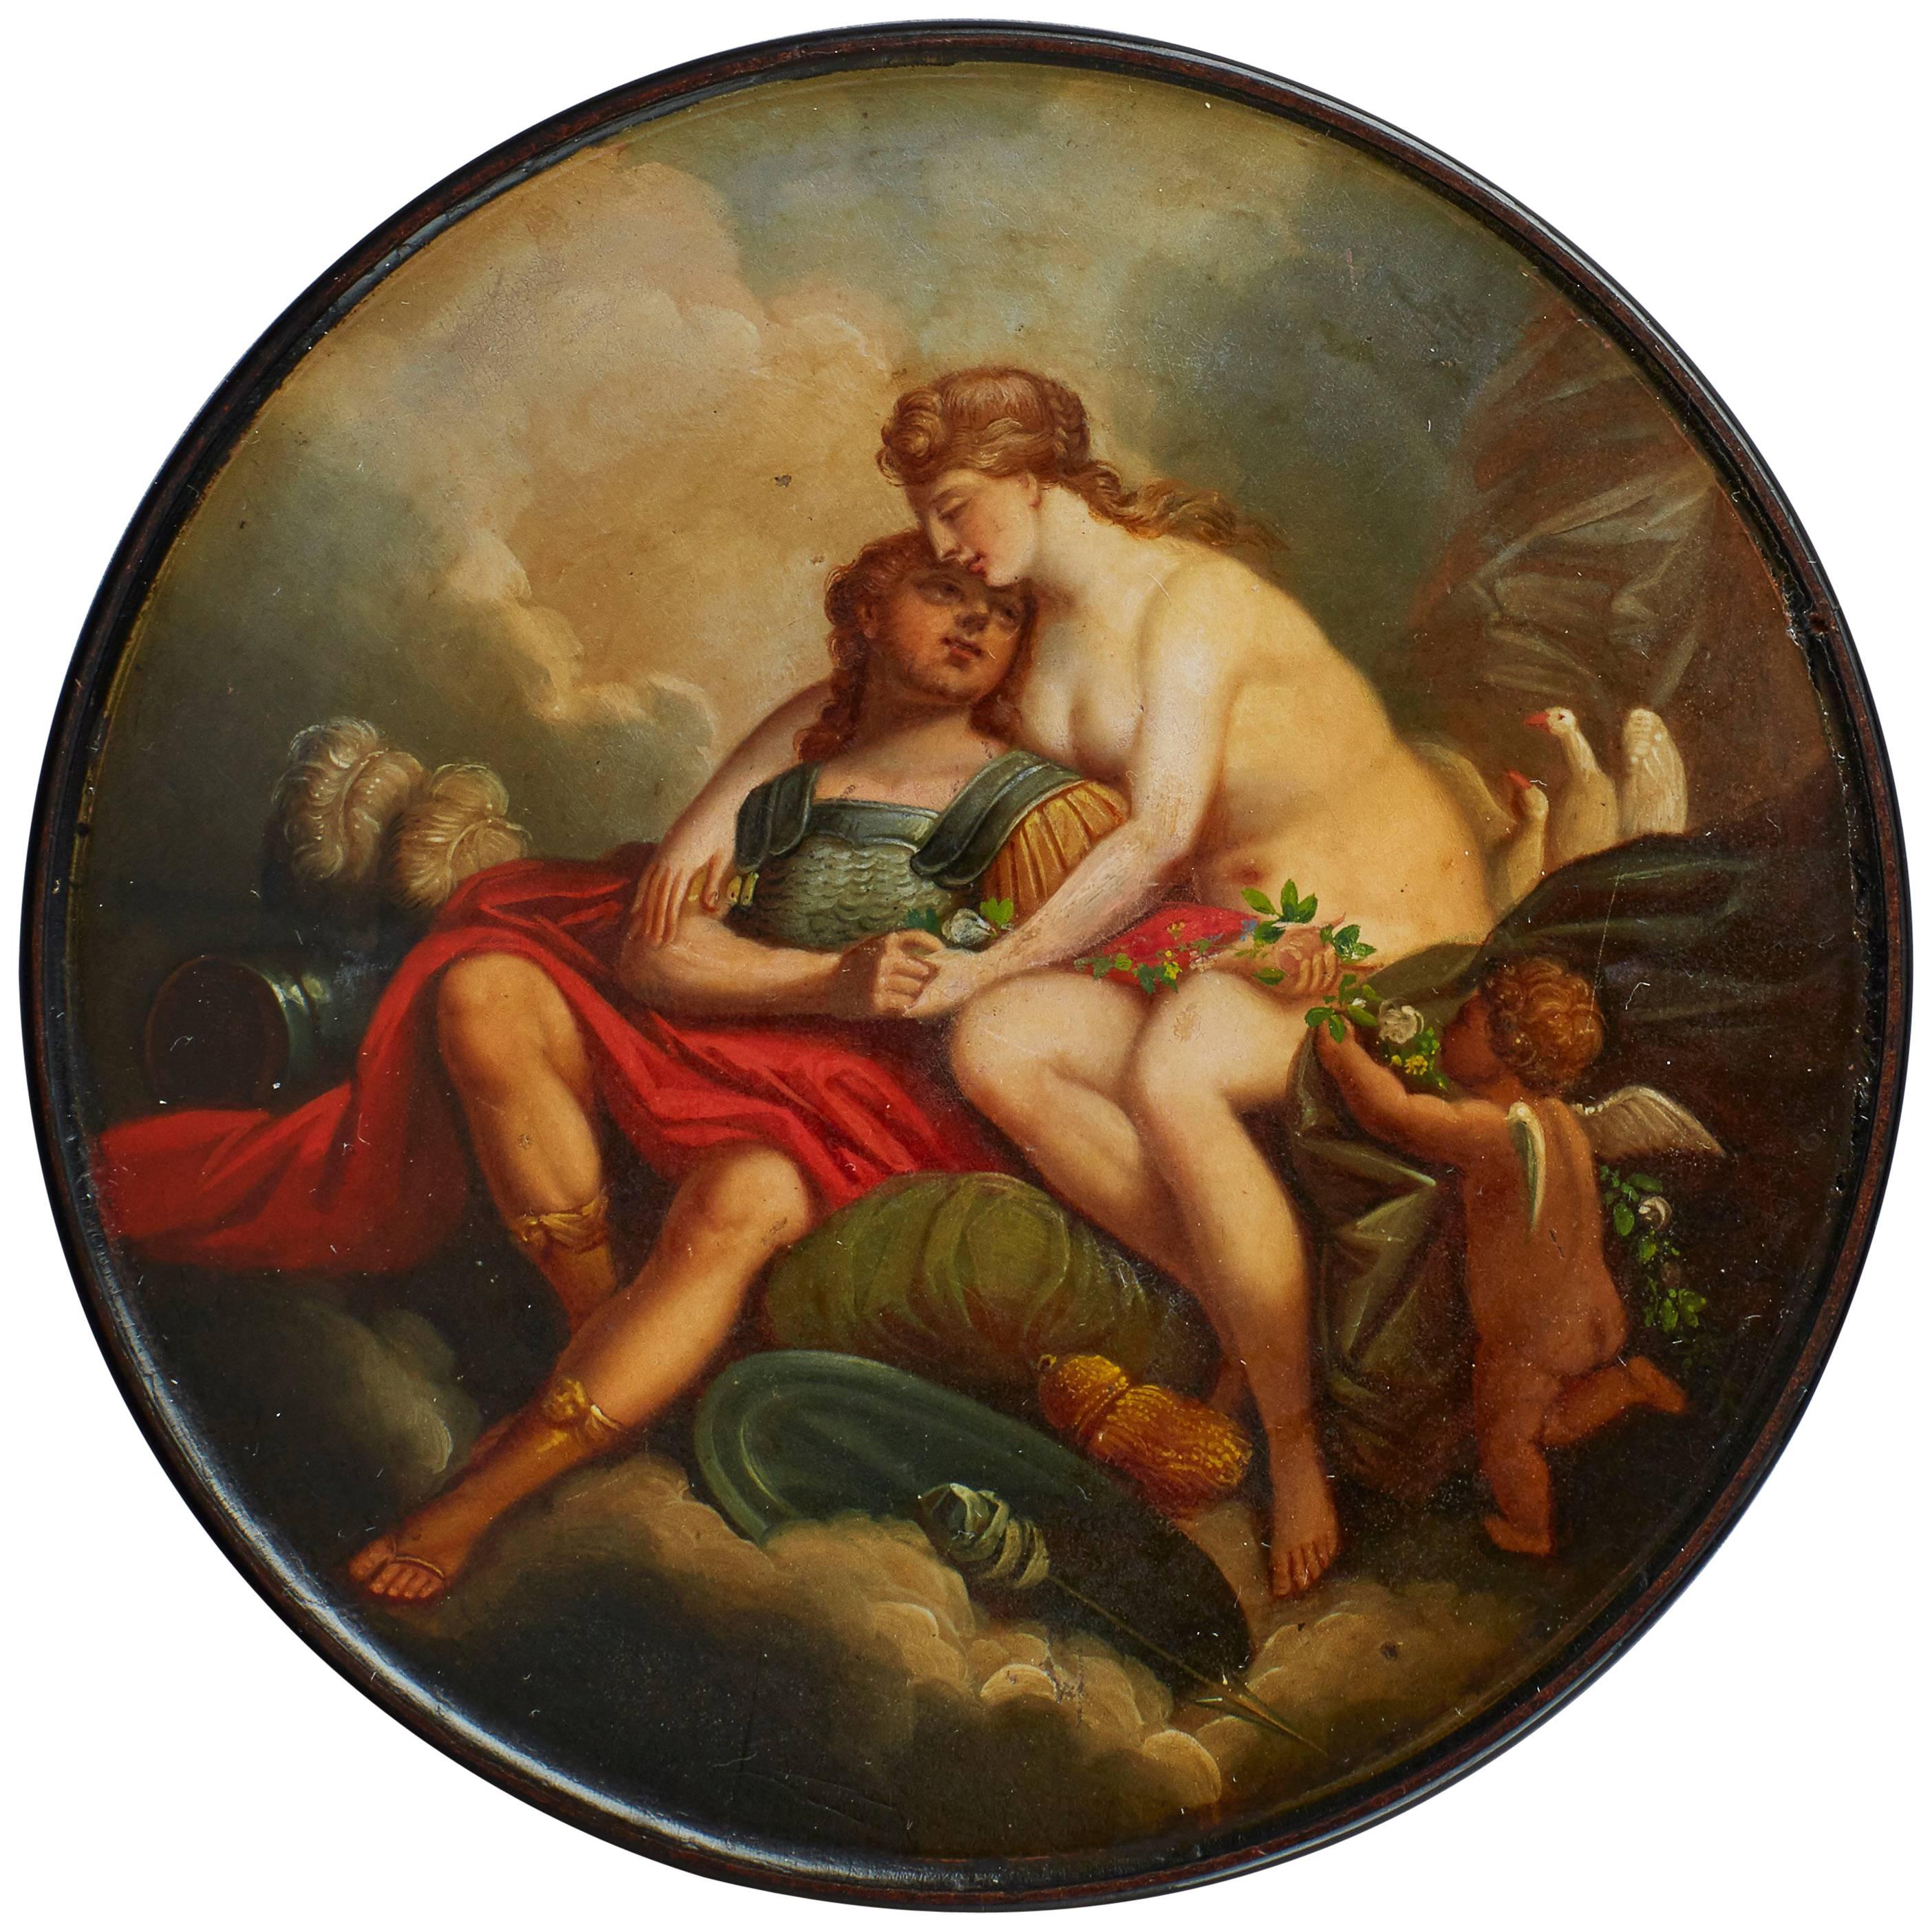 German Early 19th Century Lacquer Snuff Box by Stobwasser 'Mars and Venus'